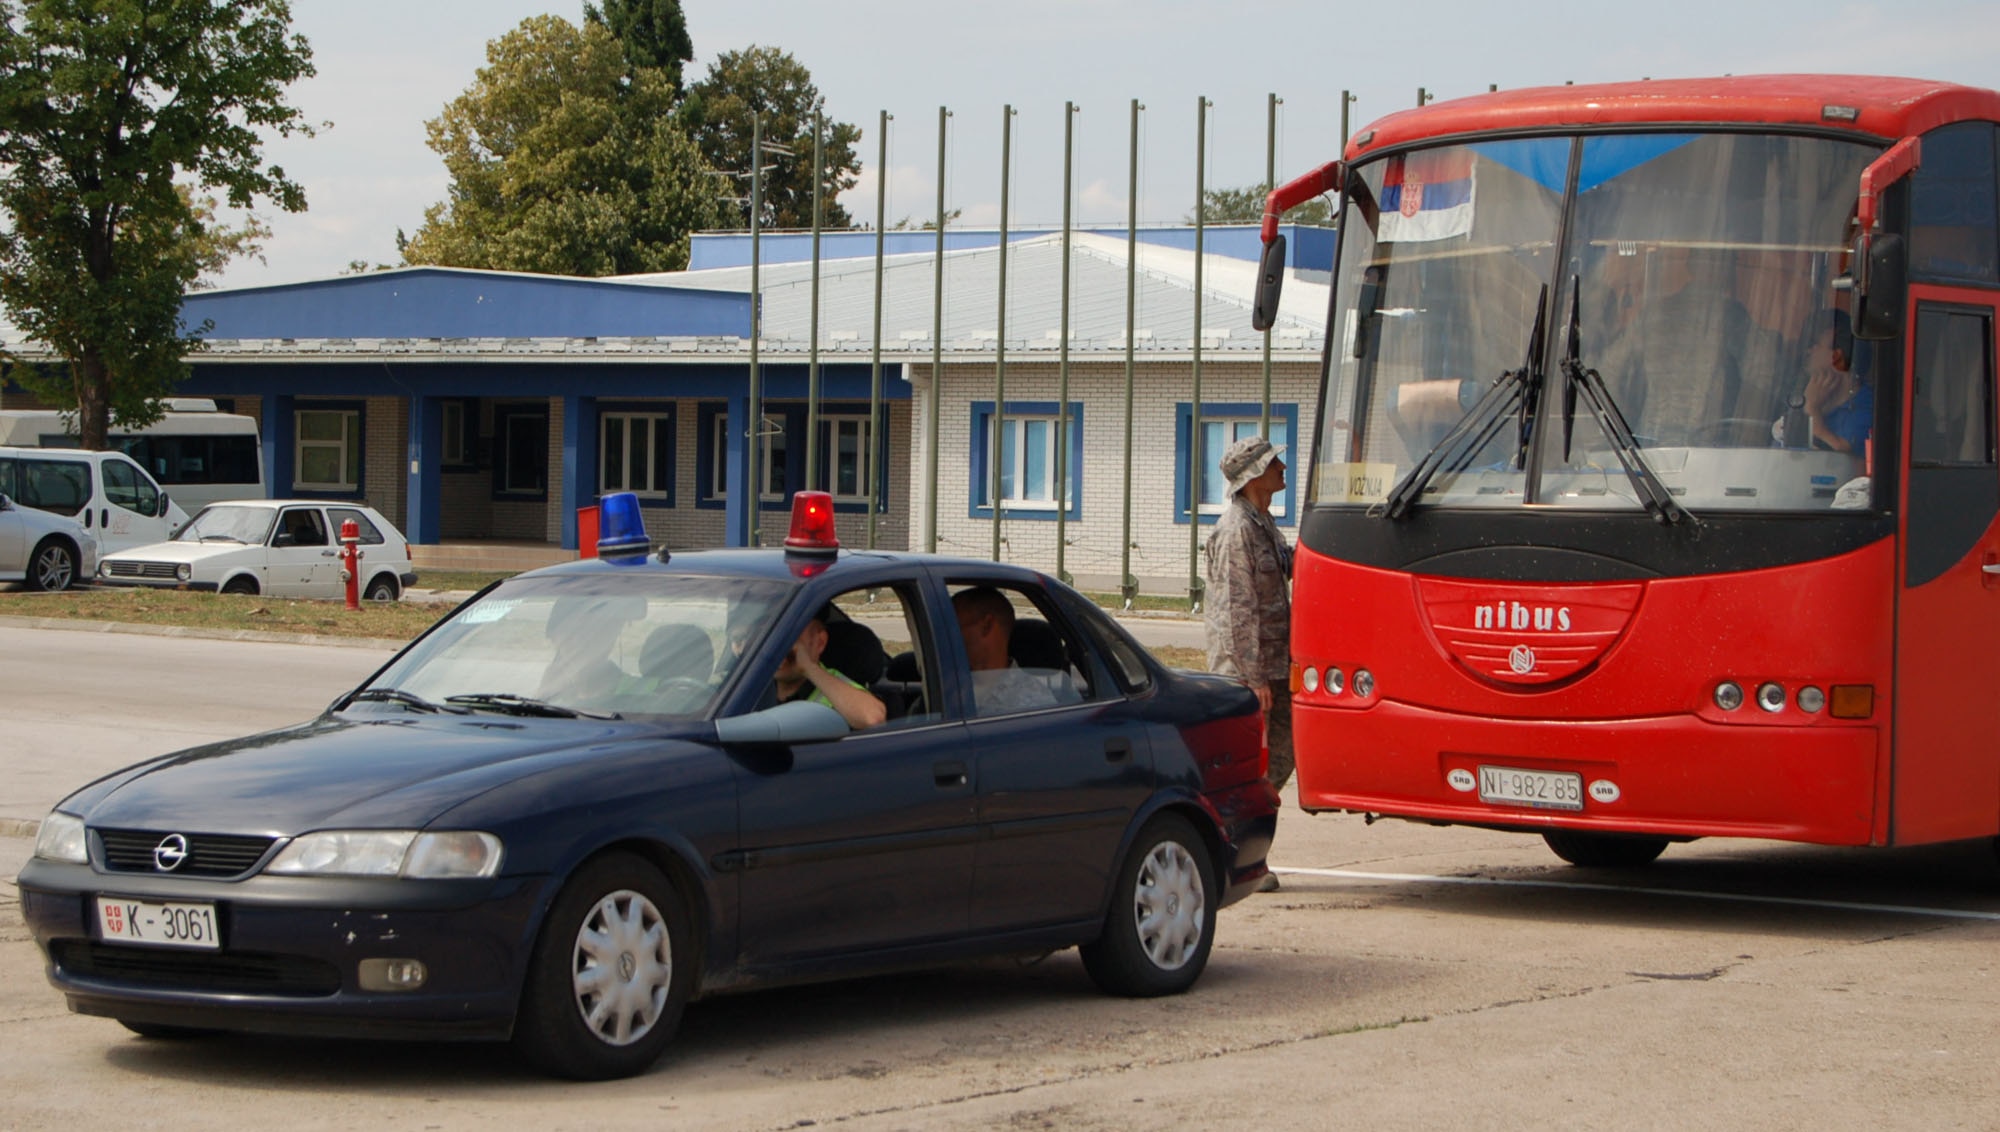 NIS, Serbia – A police escort waits for the departure of a bus carrying participants of MEDCEUR 2009, a military medical training exercise in Central and Eastern Europe, Aug. 31 after in-processing the group into the exercise, scheduled for Sept. 2-13. (U.S. Air Force photo/Senior Airman Kali L. Gradishar)